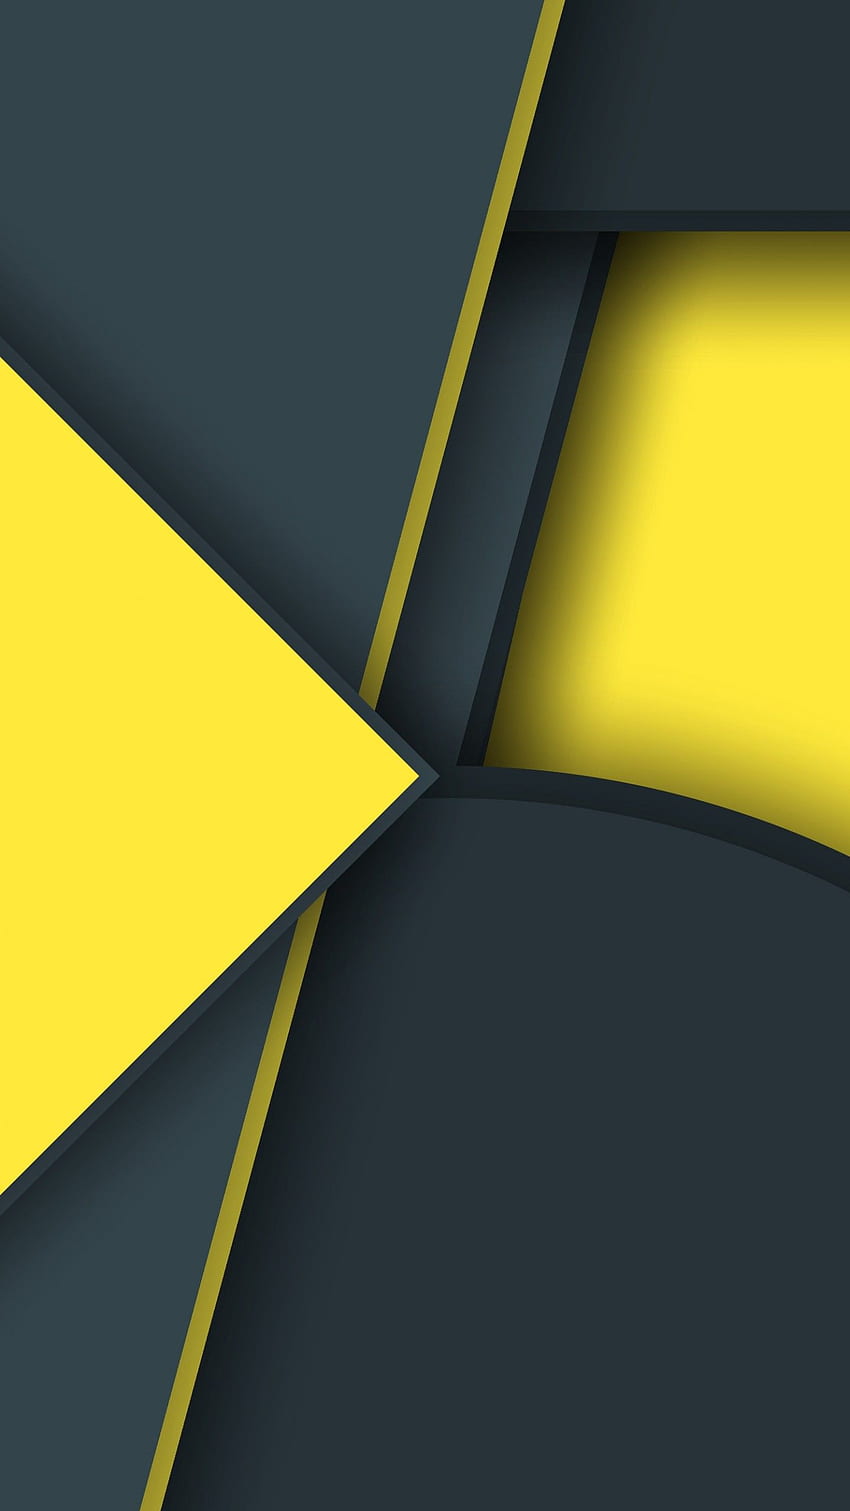 Material Design, Stock, Yellow, Shapes, Material, , Abstract,. for iPhone, Android, Mobile and HD phone wallpaper